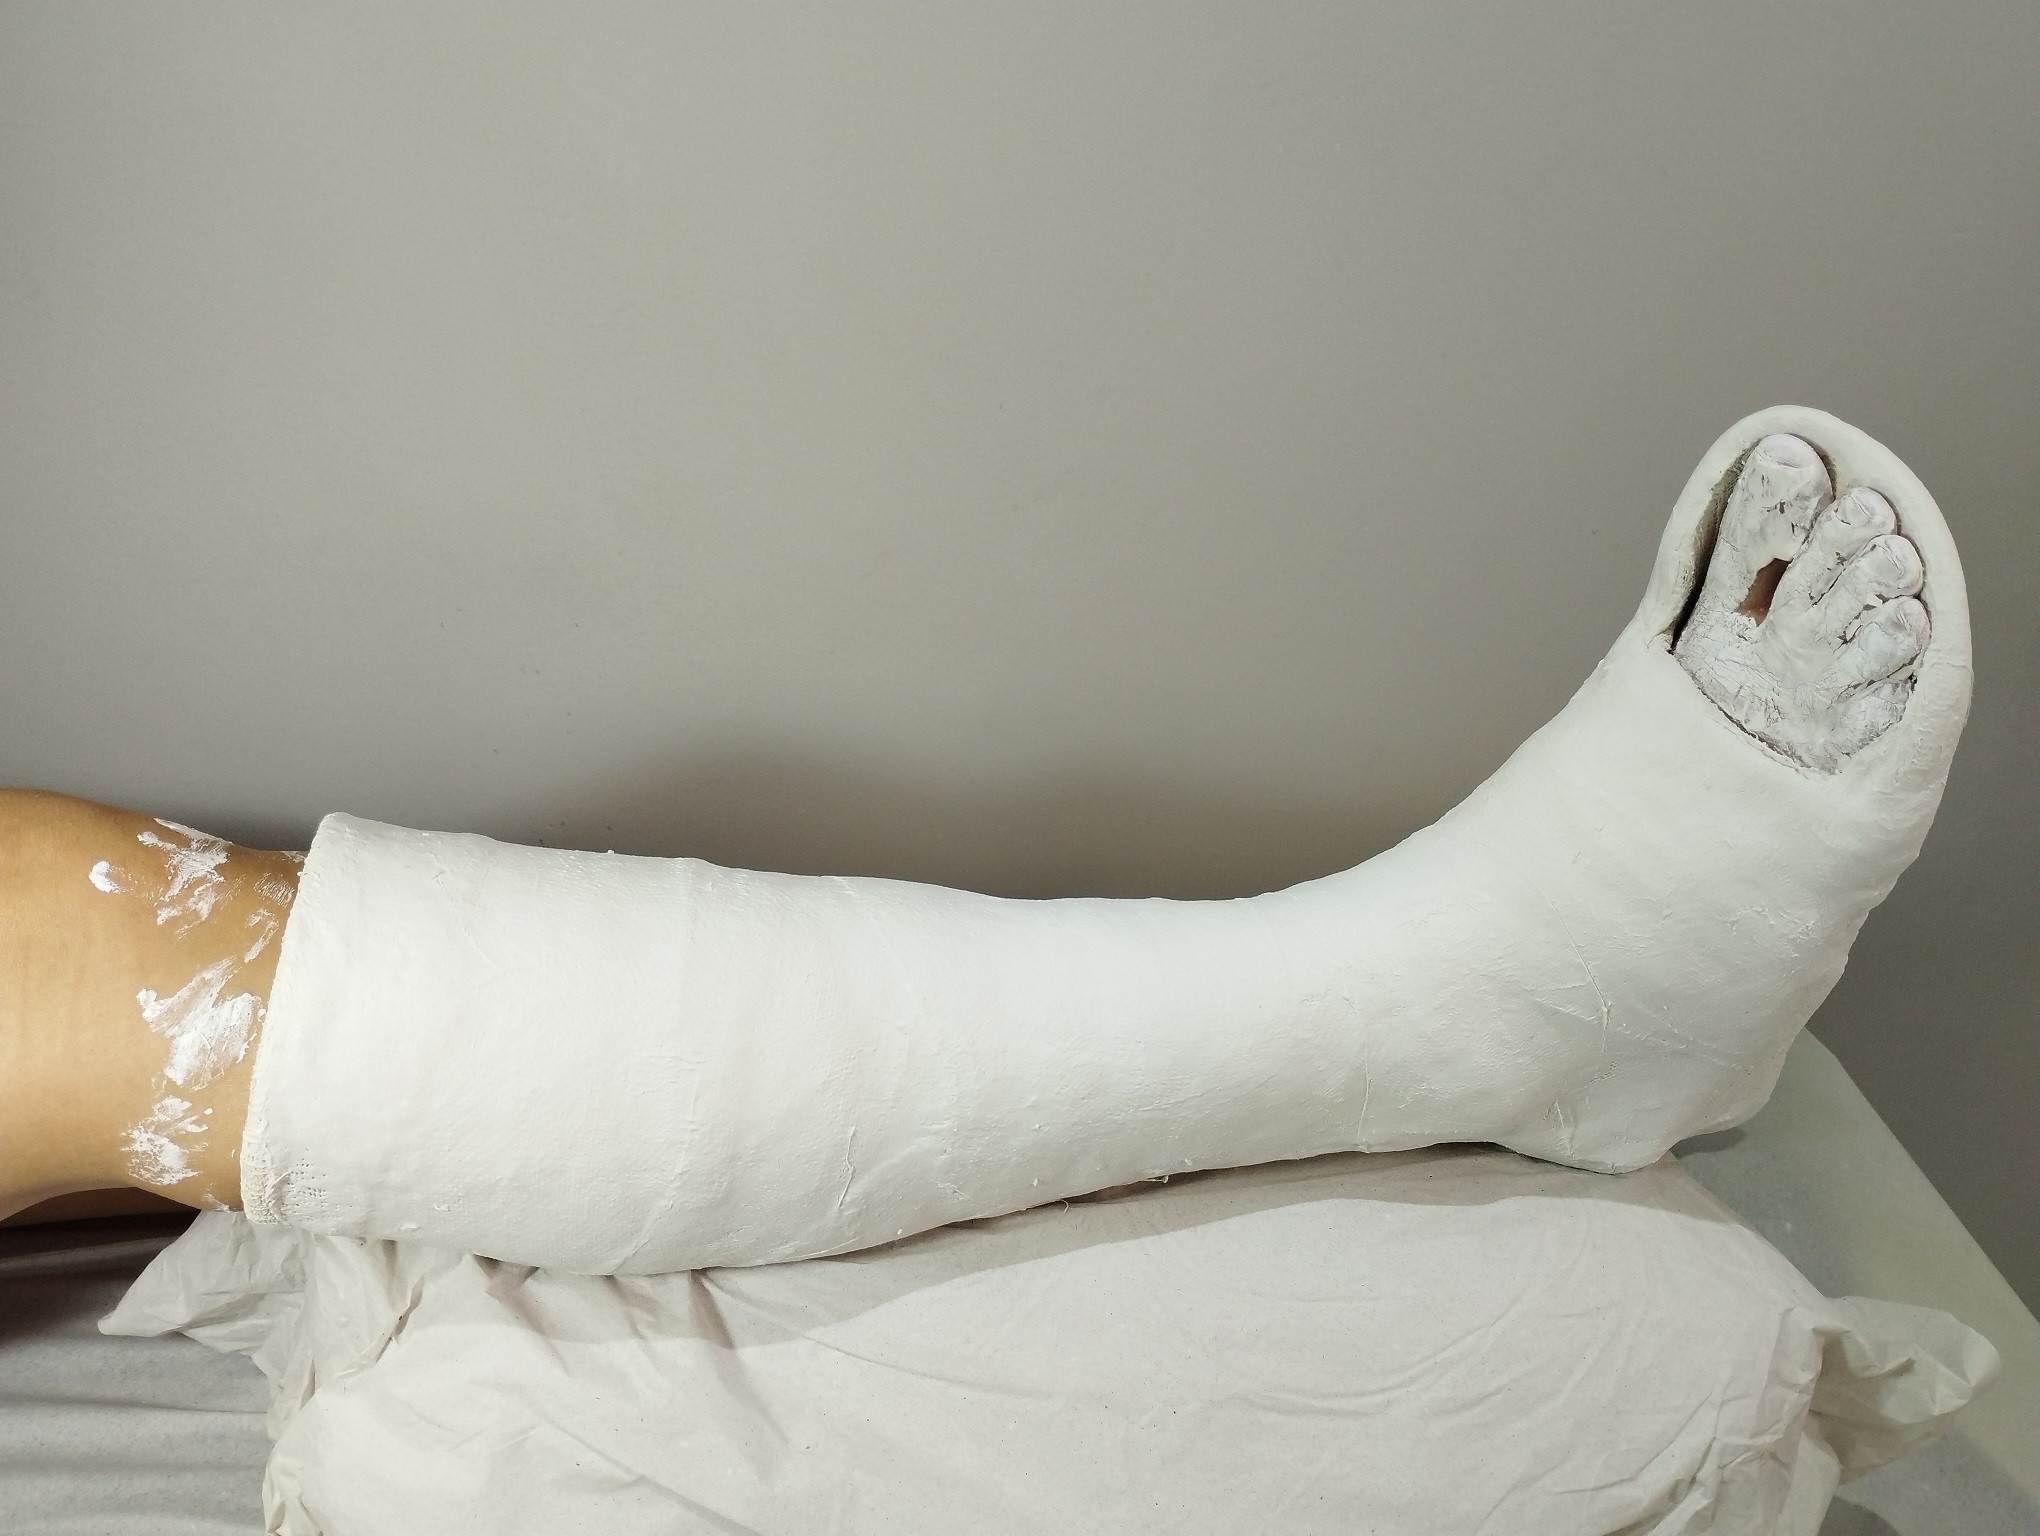 Here you can find photos and videos of patients with casts in the hospital.